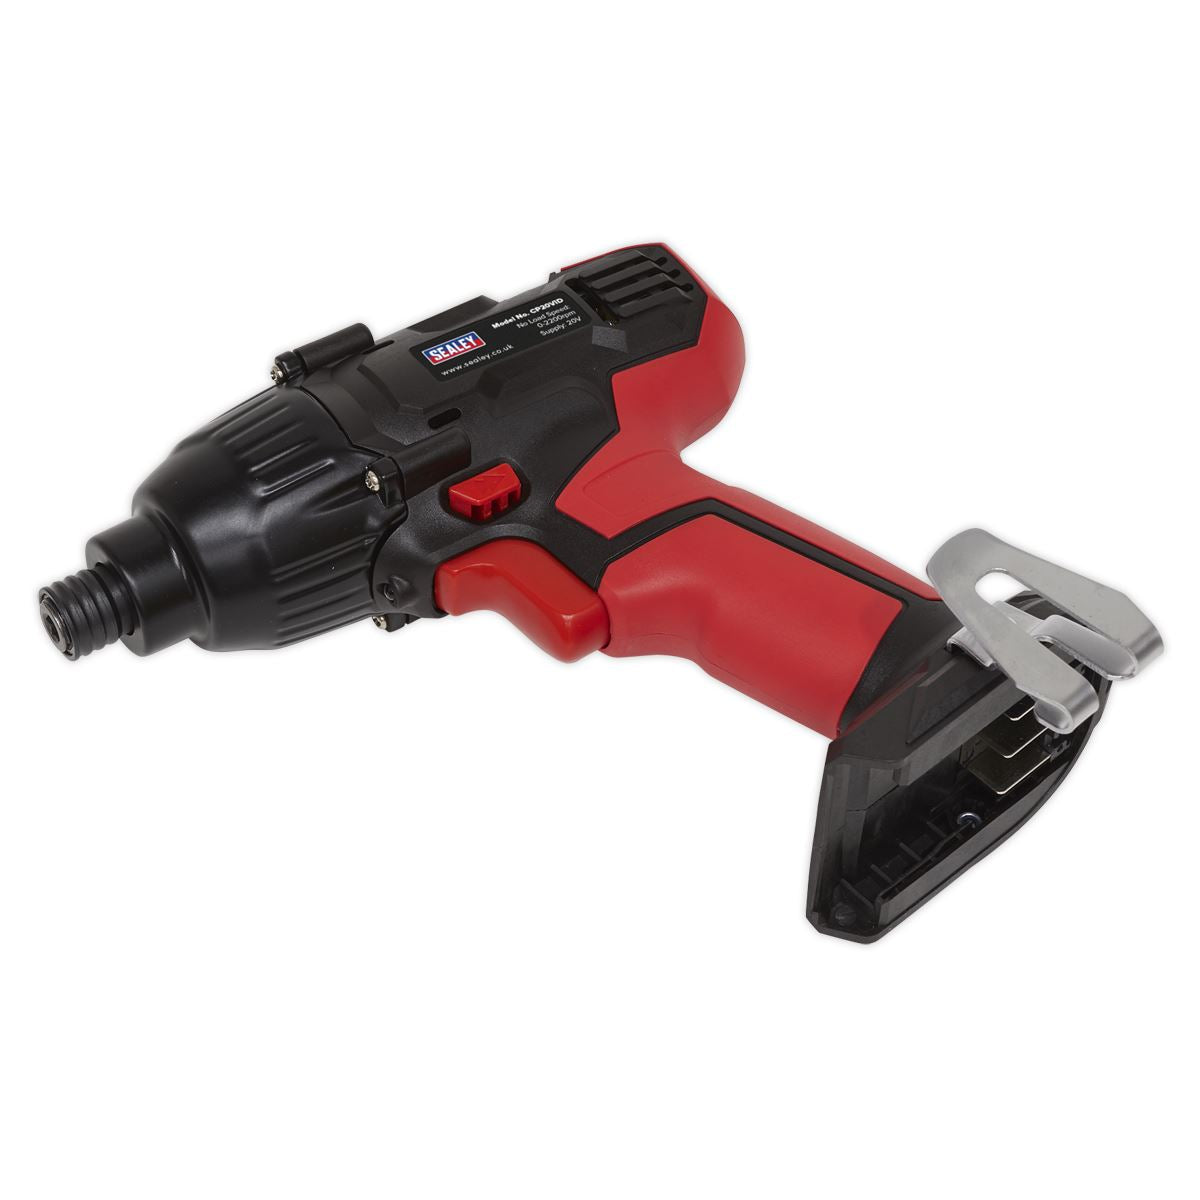 Sealey Impact Driver 20V SV20 Series 1/4"Hex Drive - Body Only